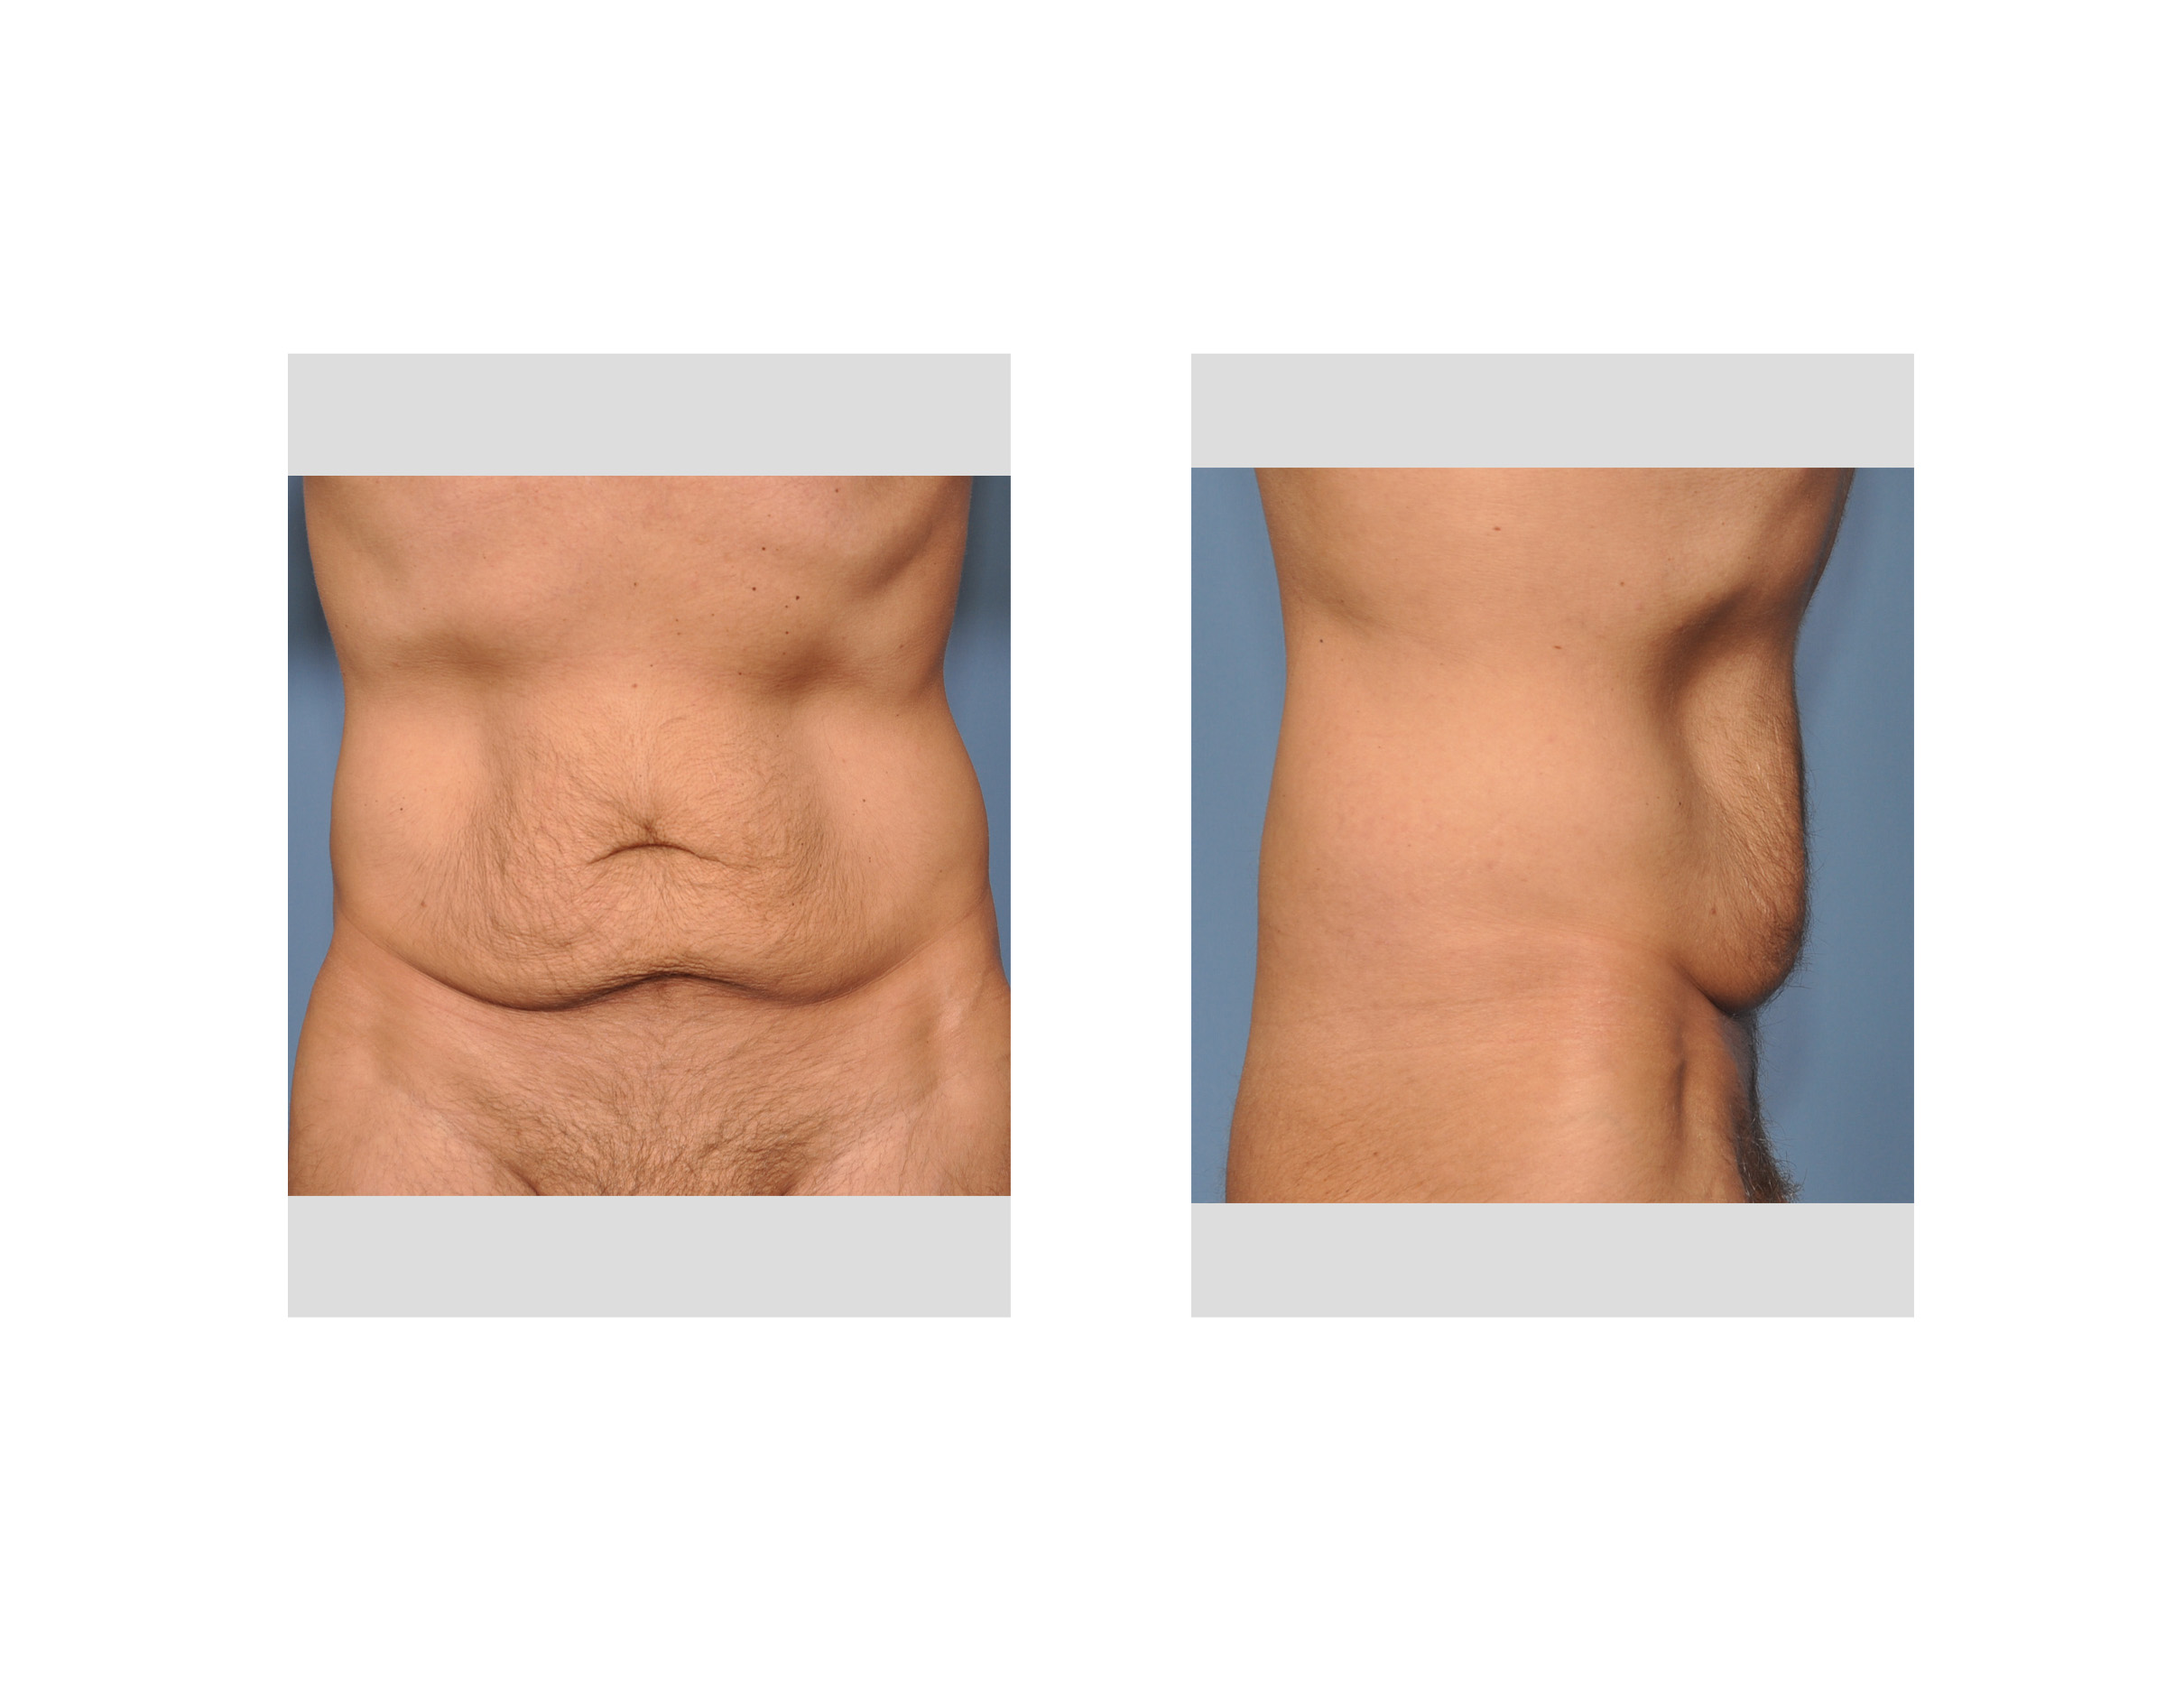 The Male Tummy Tuck after Massive Weight Loss - Explore Plastic Surgery